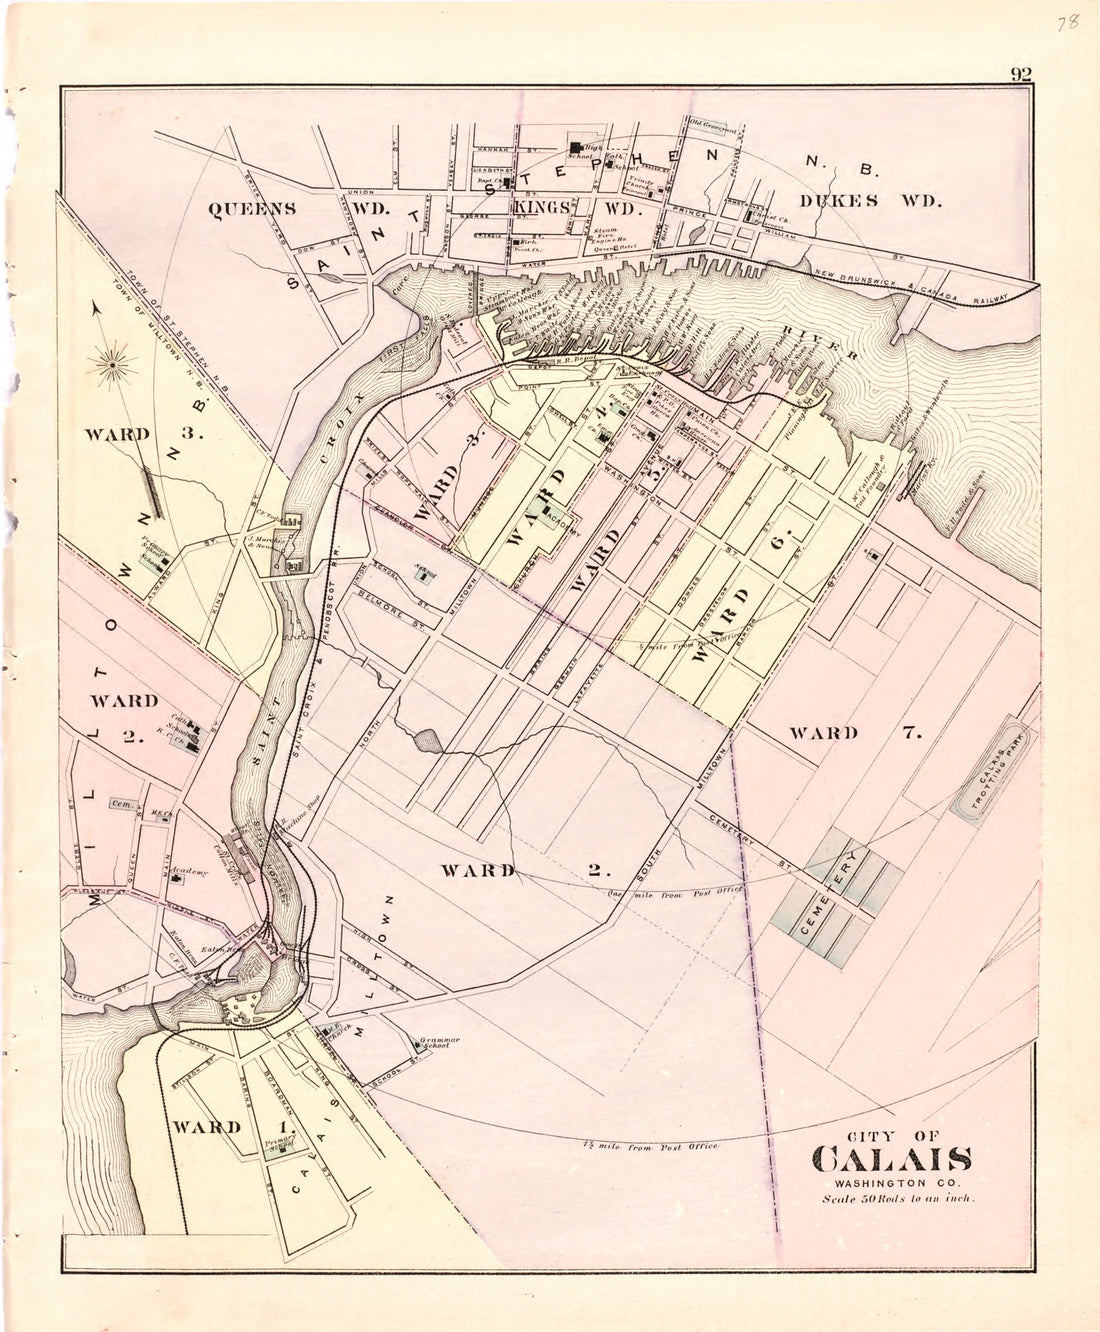 This hand drawn illustration (map) of City of Calais from Colby&